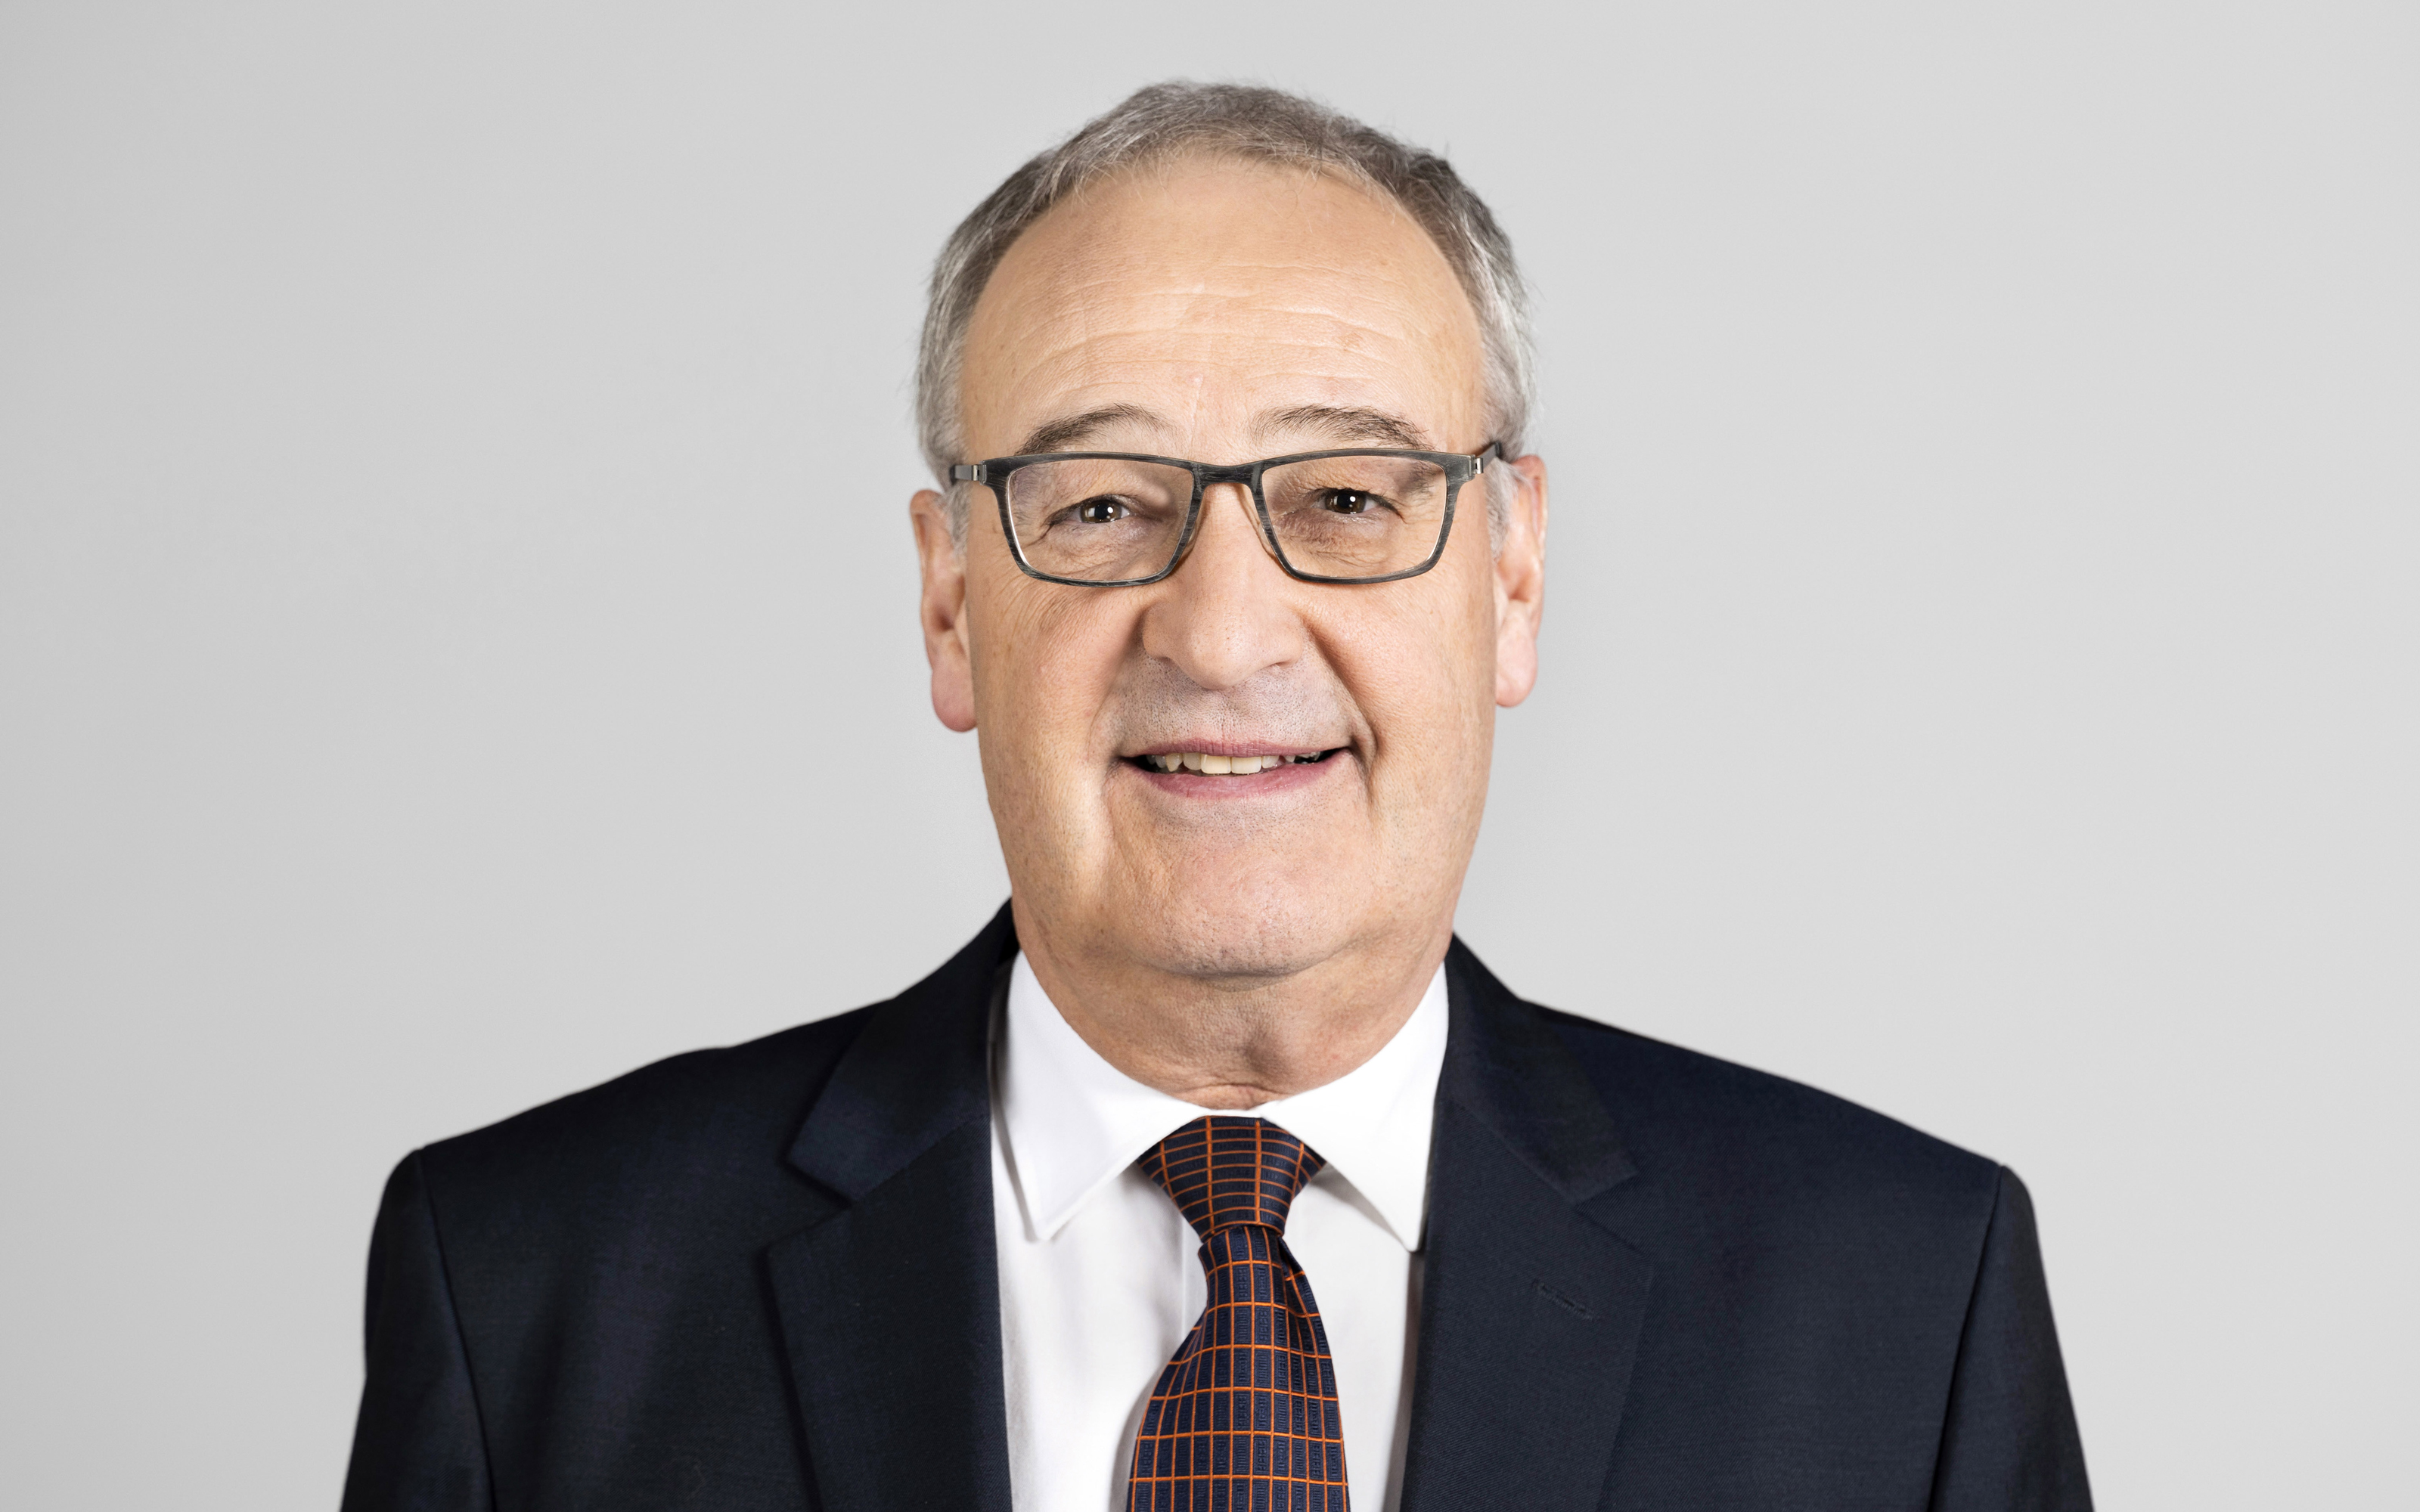 Consigliere federale Guy Parmelin